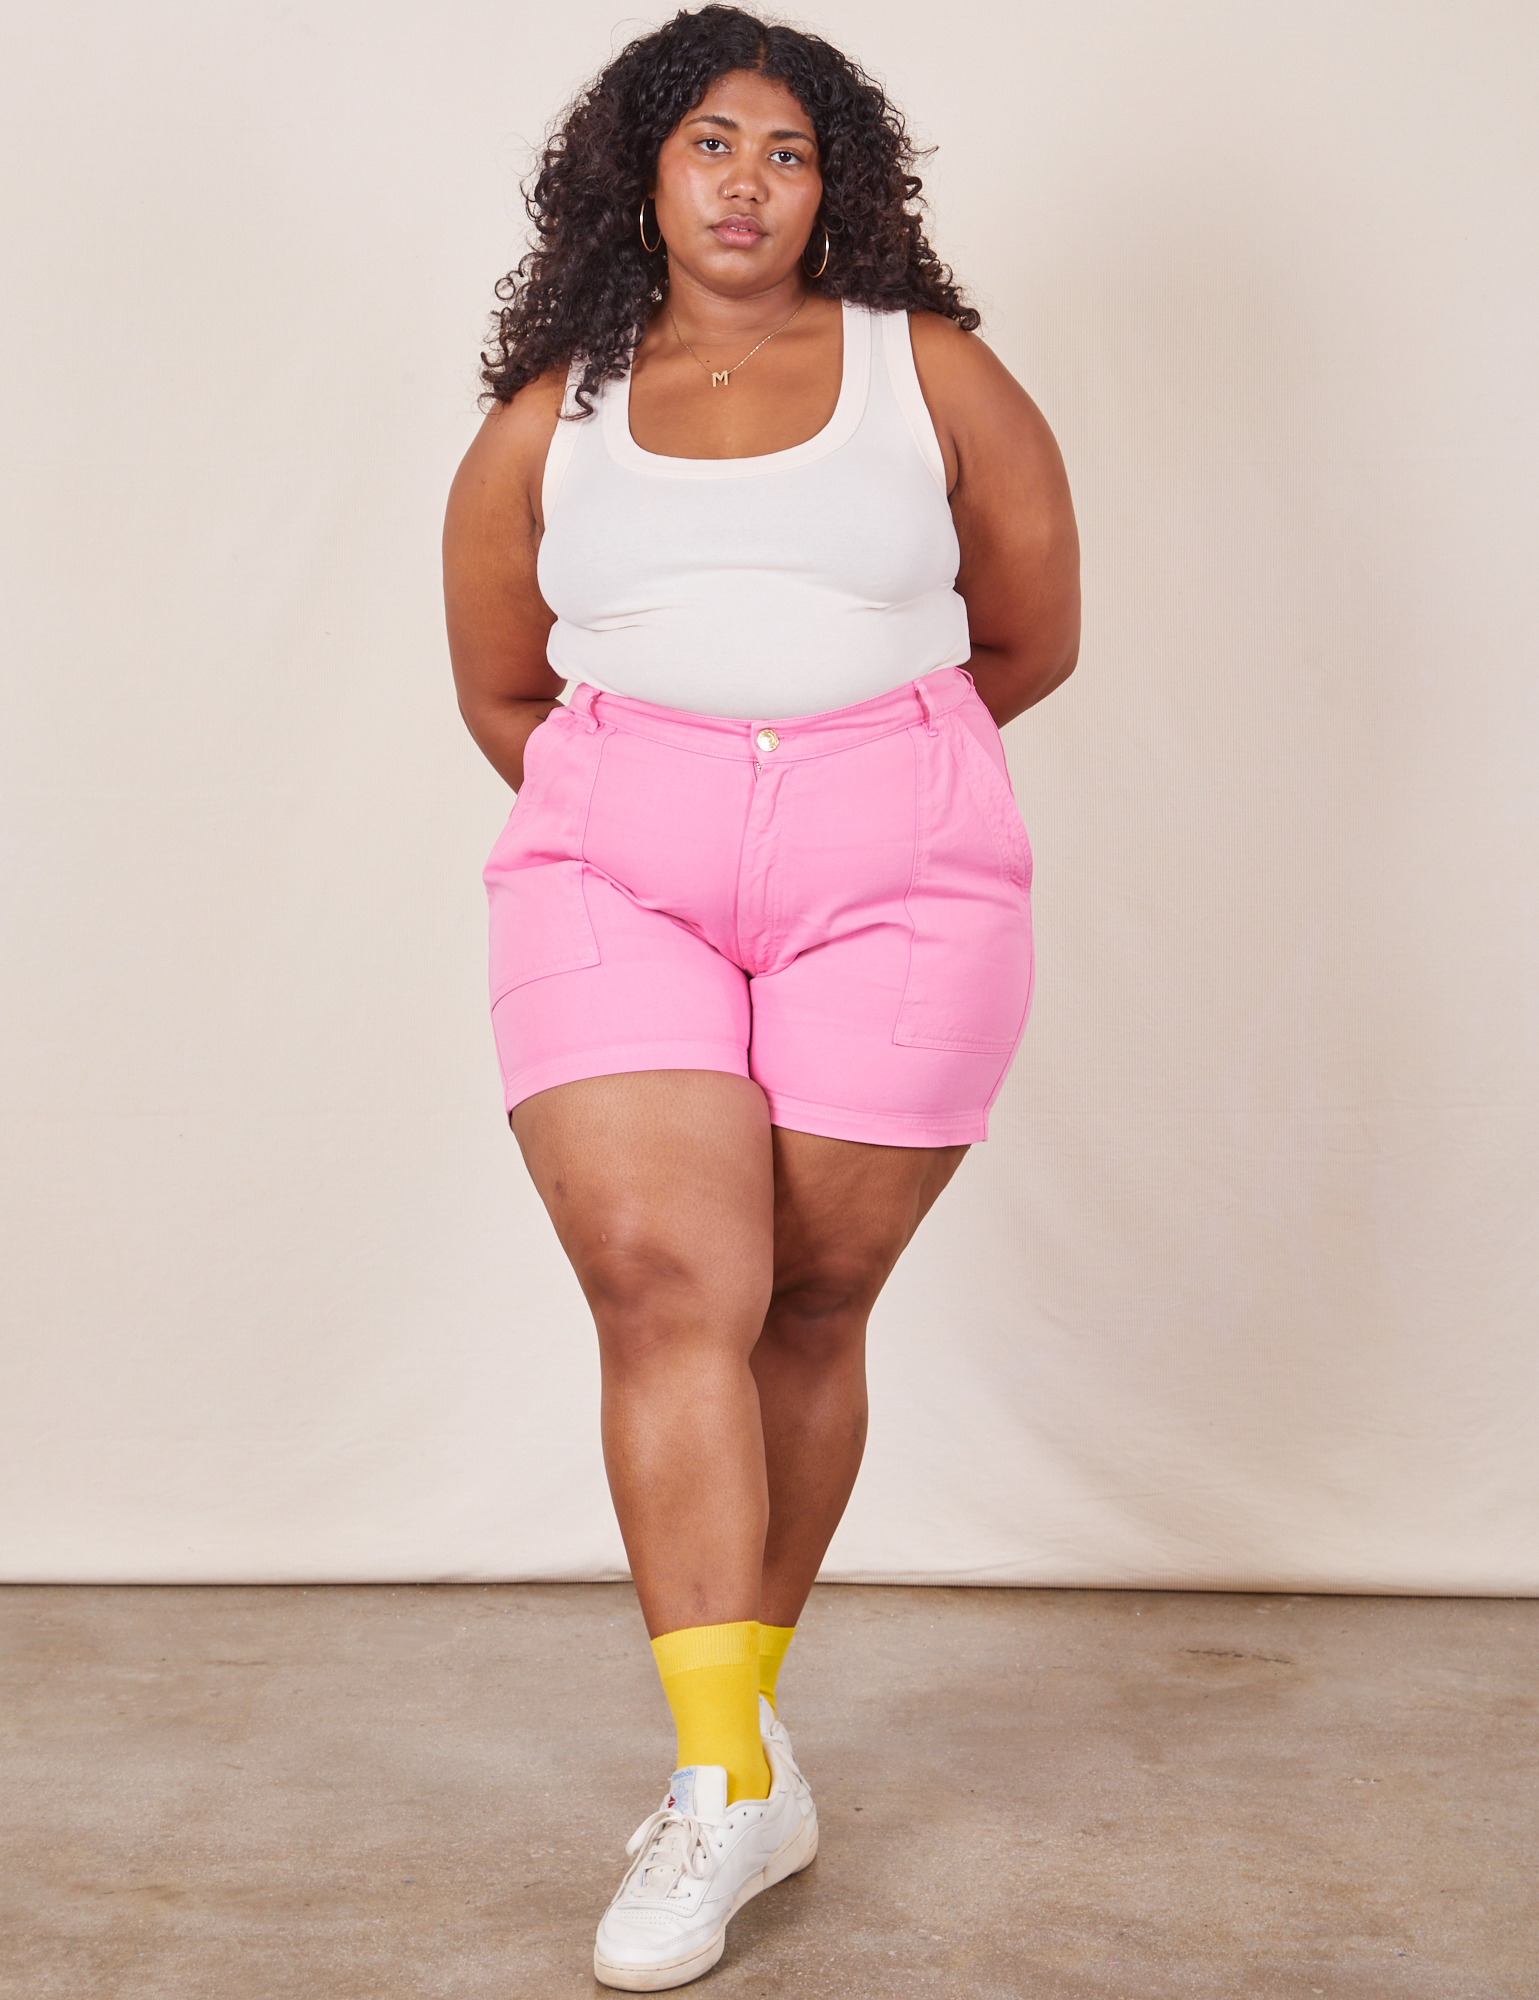 Morgan is wearing Classic Work Shorts in Bubblegum Pink and Tank Top in vintage tee off-white